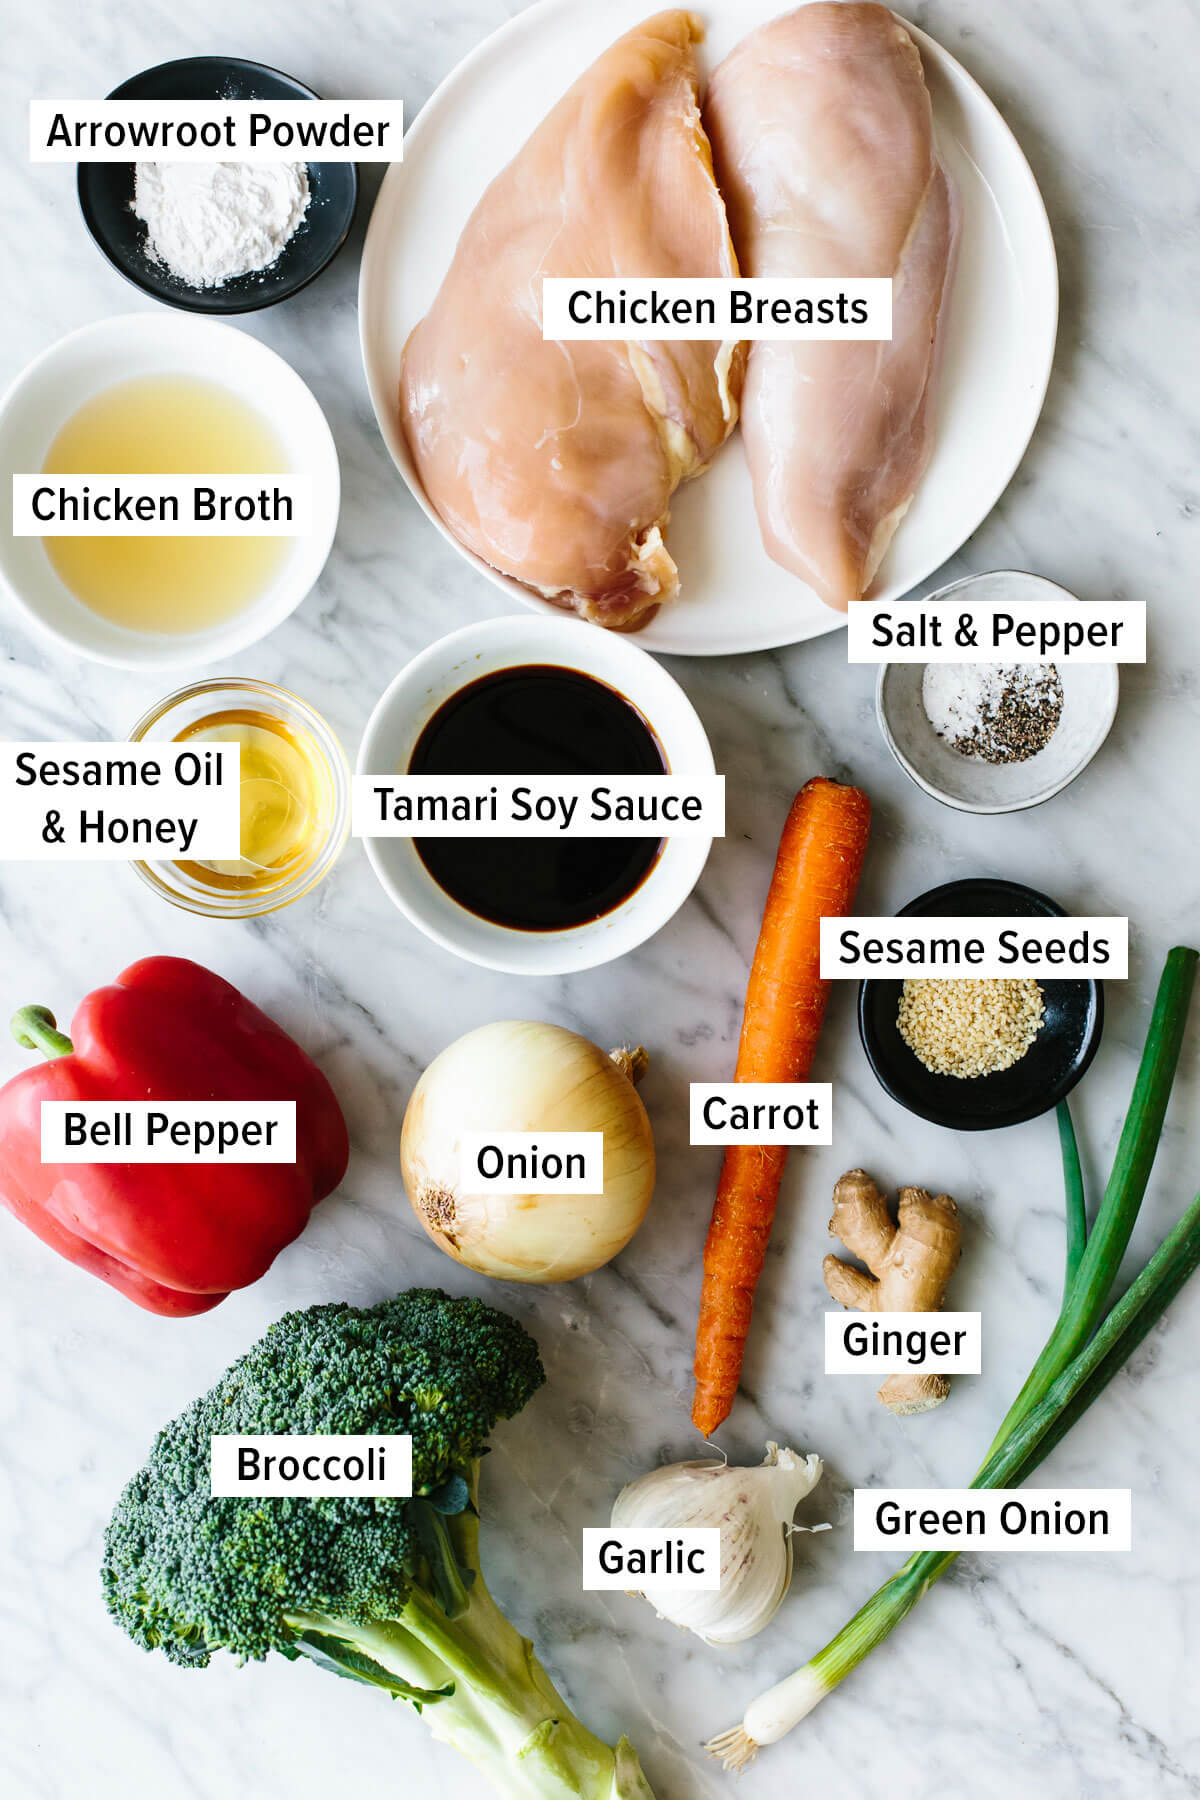 Ingredients for chicken stir-fry on a table.